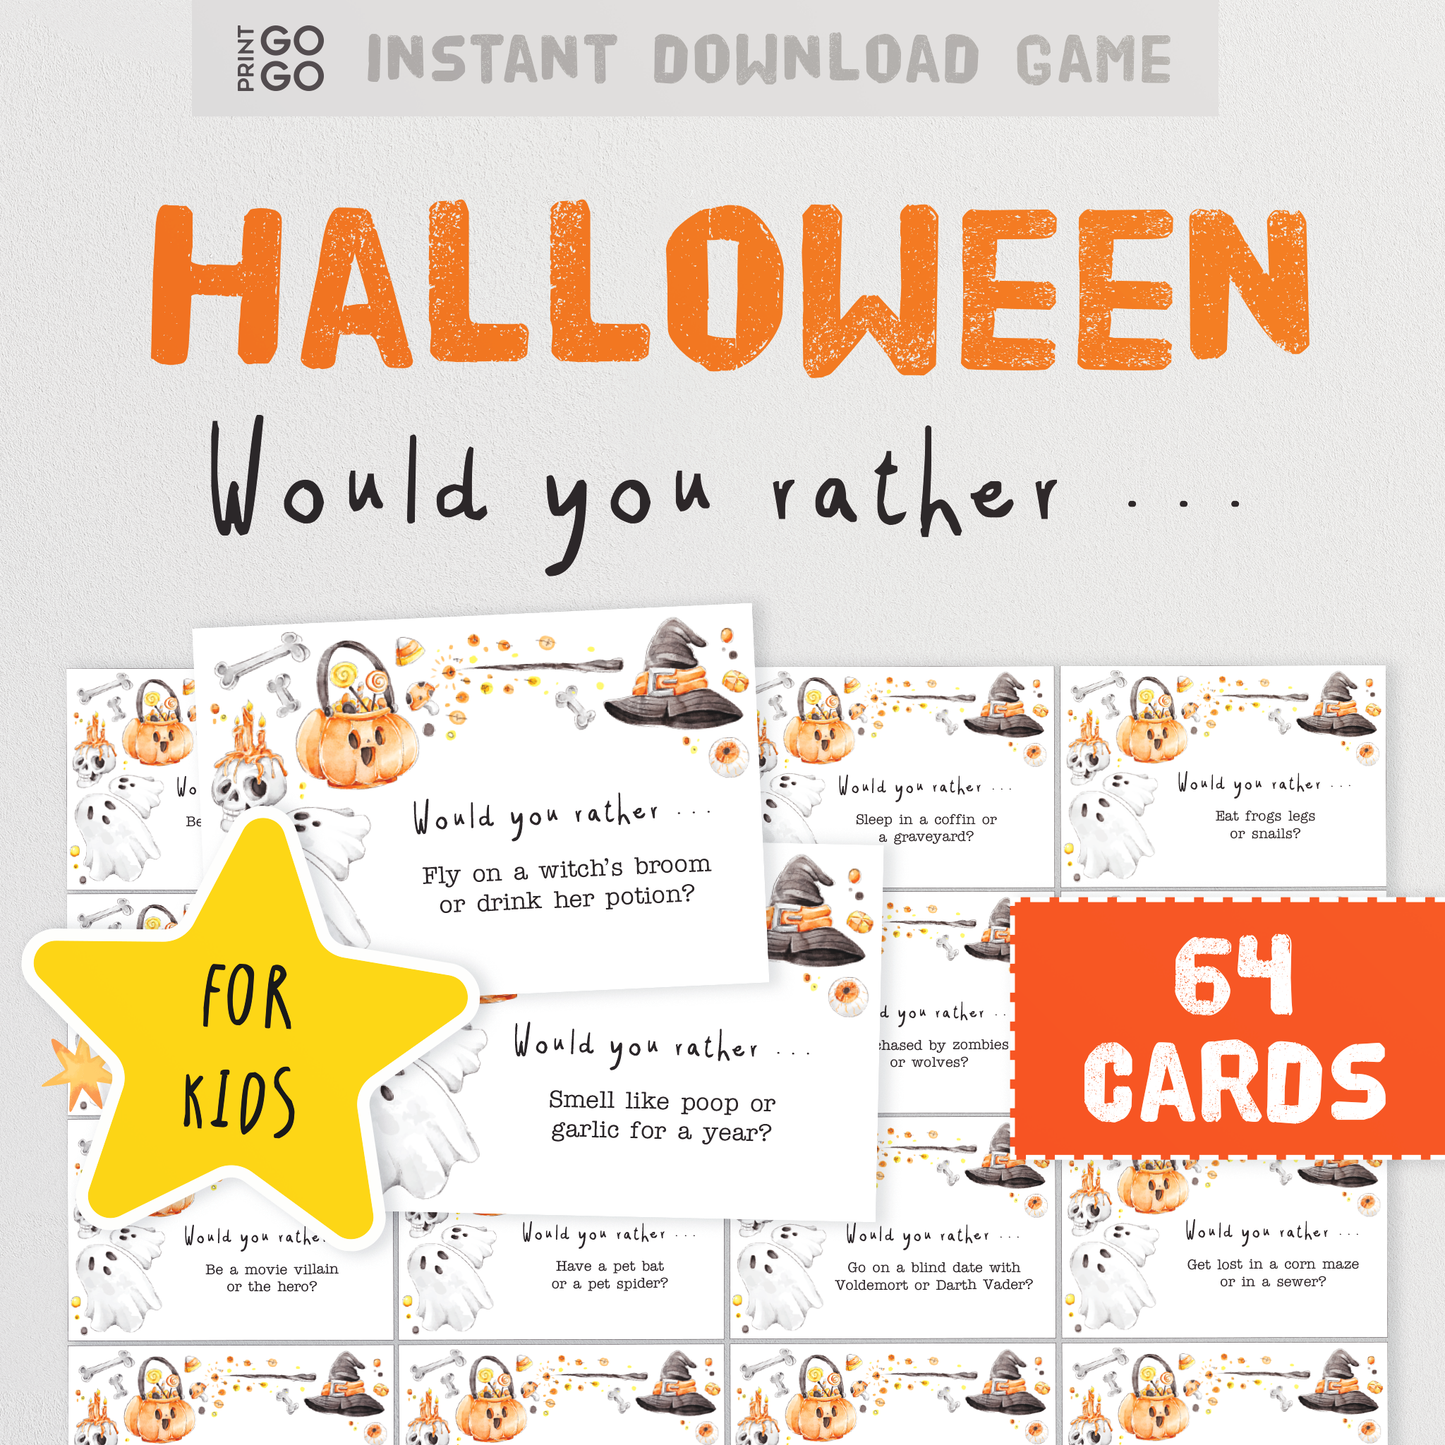 Halloween Would You Rather Cards - The Fun Halloween Party Activity for Kids!